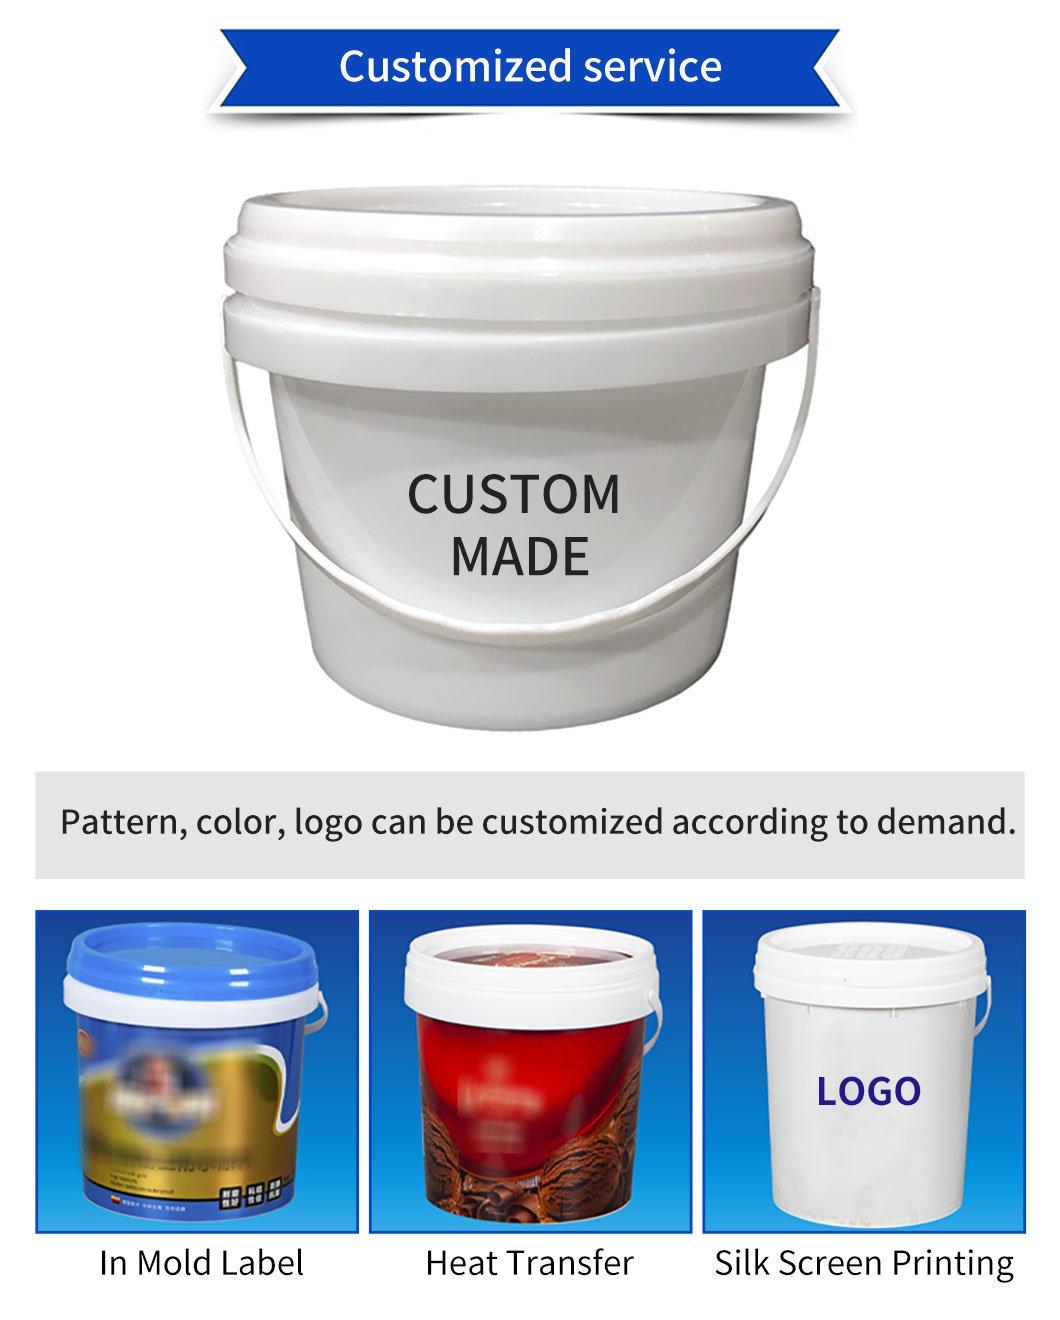 15L PP Food Grade Paint Bucket with Metal & Plastic Handle and Tear off Lid